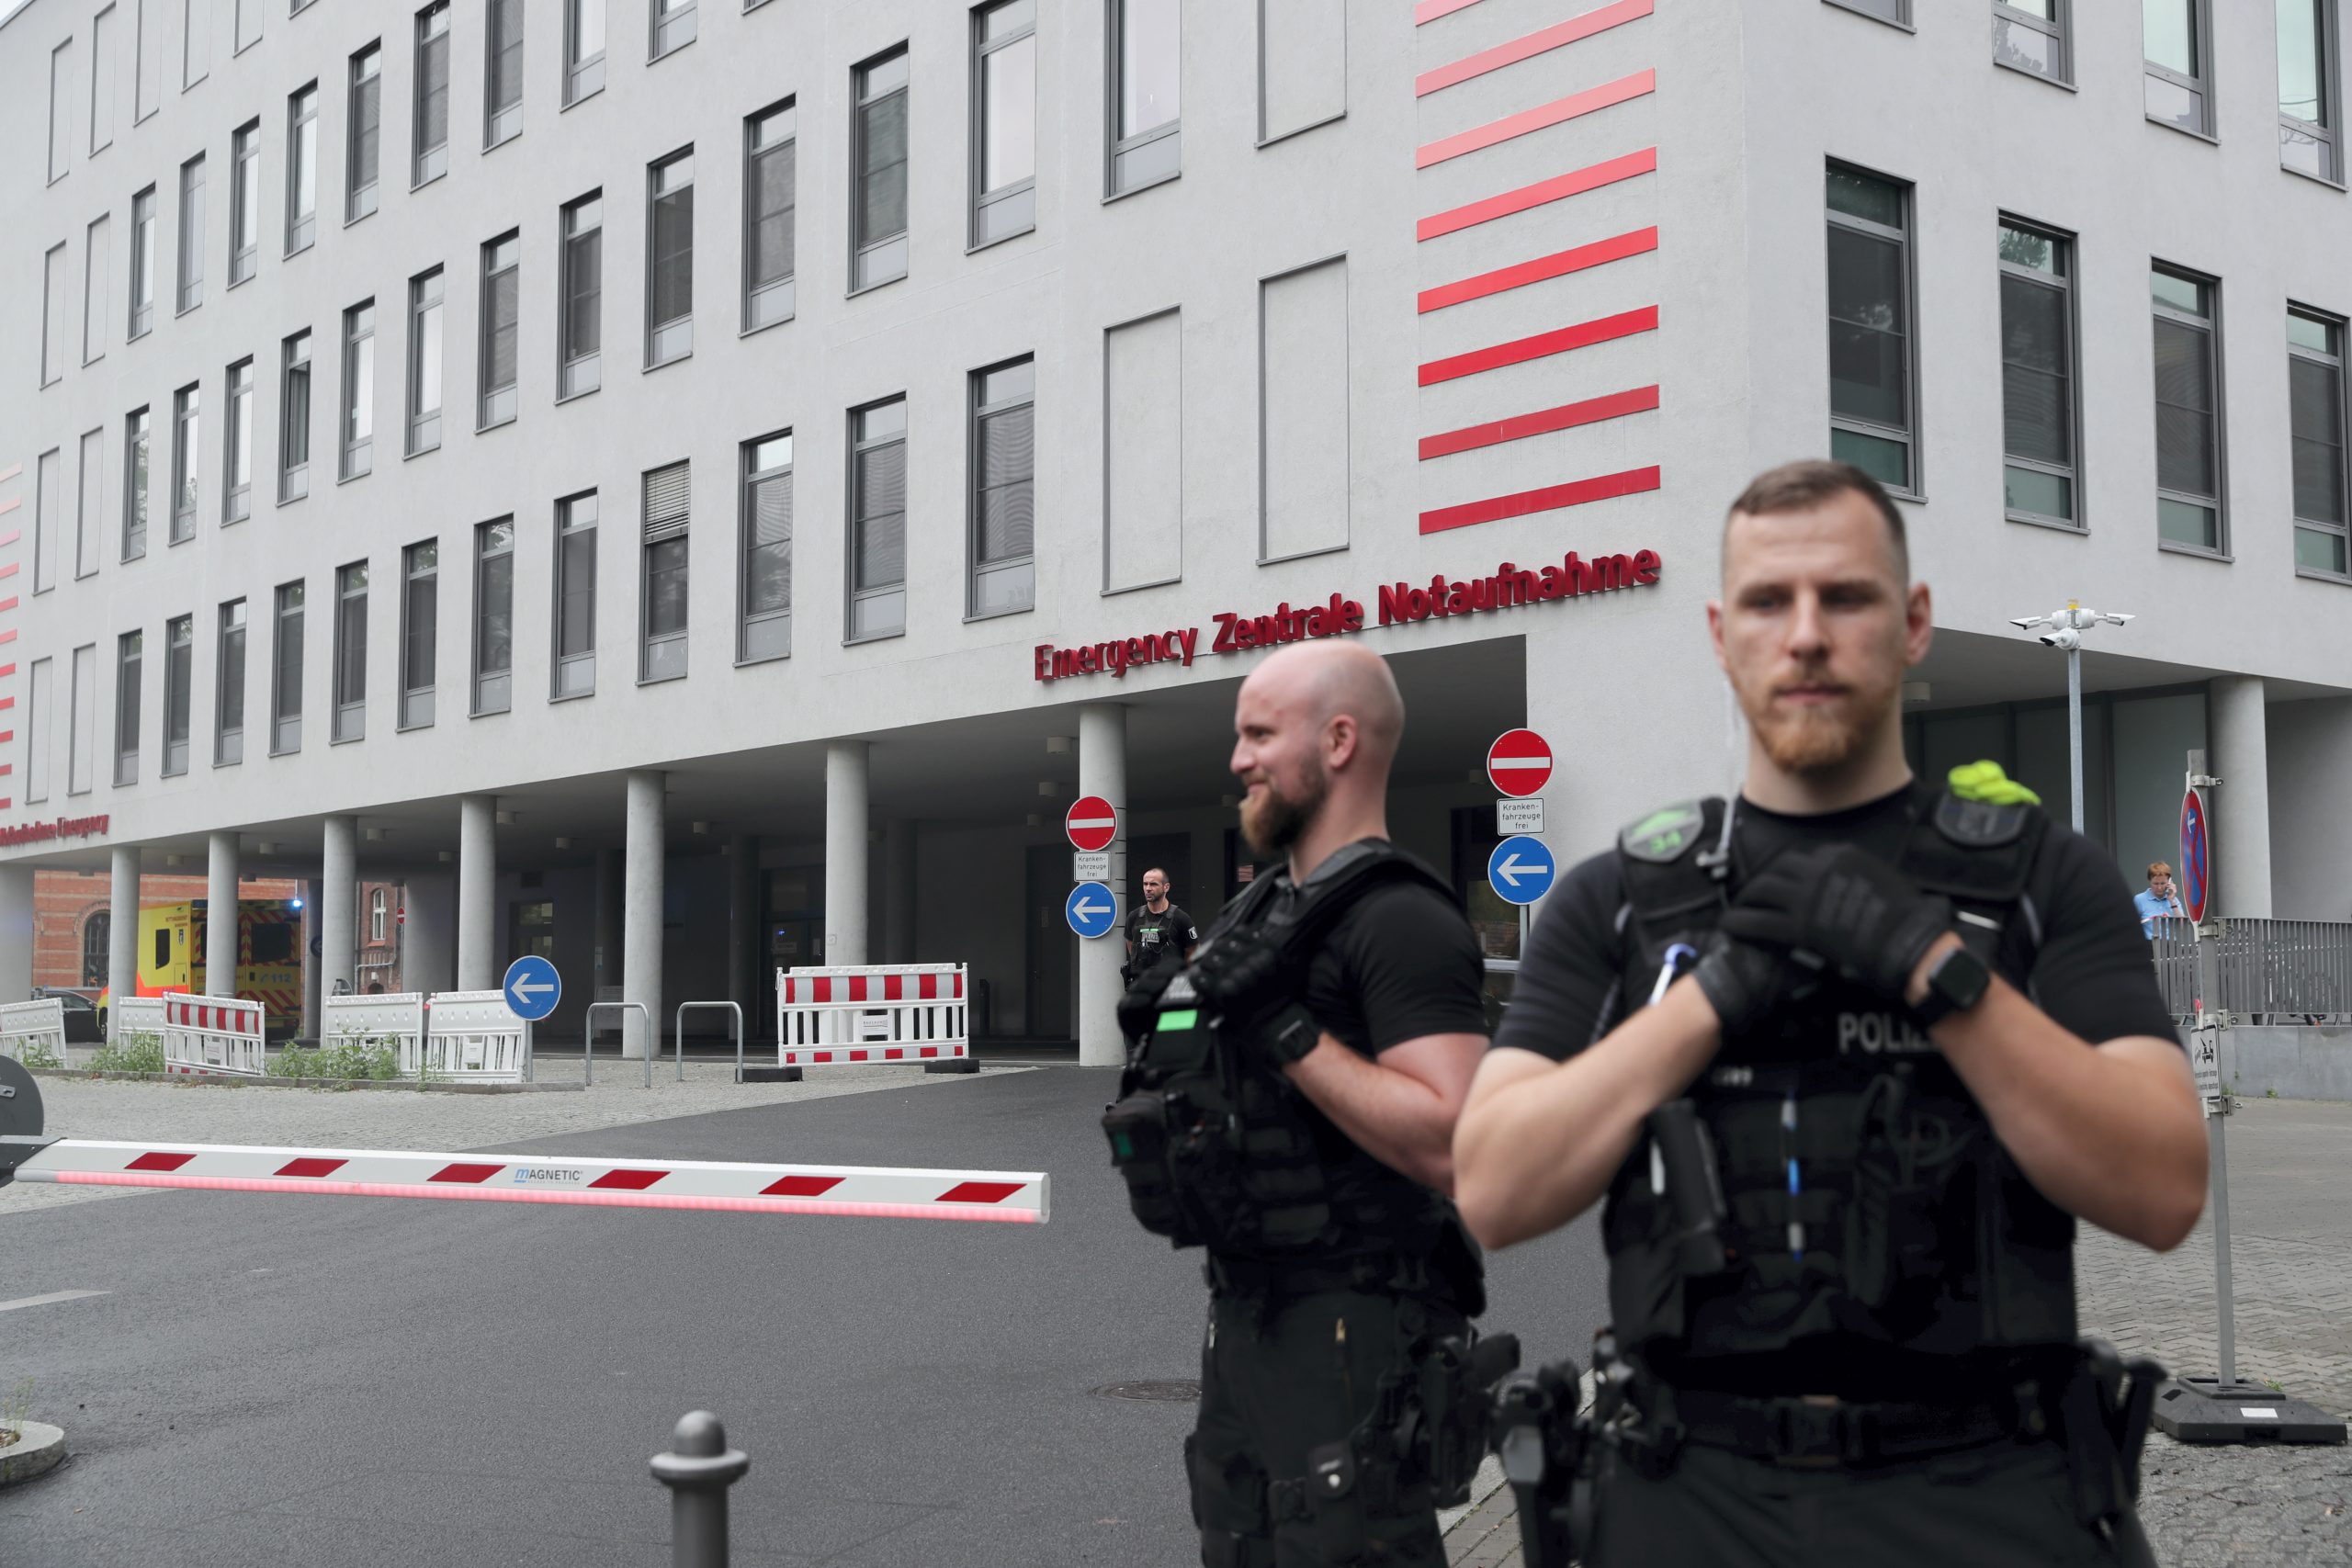 epa08617728 Police guard the entrance of Russian opposition activist as Alexei Navalny (not pictured) arrives at Charite Campus Mitte hospital in Berlin, Germany, 22 August 2020. Navalny was first placed in an hospital in Omsk, Russia, after he felt bad on board of a plane on his way from Tomsk to Moscow. The flight was interrupted and after landing in Omsk Navalny was delivered to hospital with a suspicion on a toxic poisoning. The hospital management agreed on 21 August 2020 to transport Navalny to a German hospital for further treatment.  EPA/HAYOUNG JEON